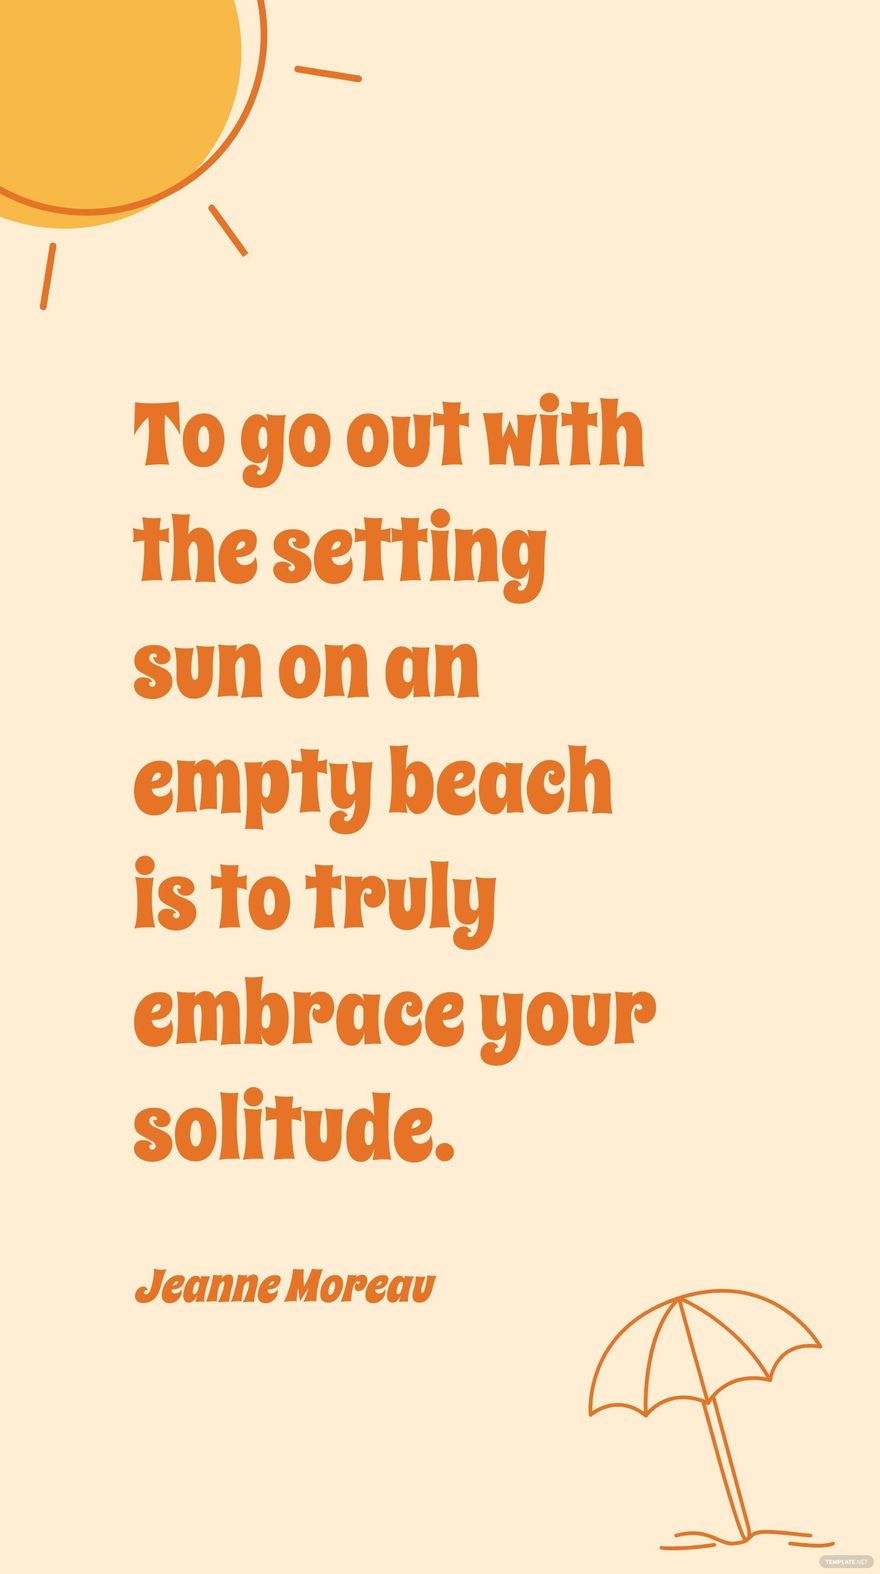 Free Jeanne Moreau - To go out with the setting sun on an empty beach is to truly embrace your solitude. in JPG